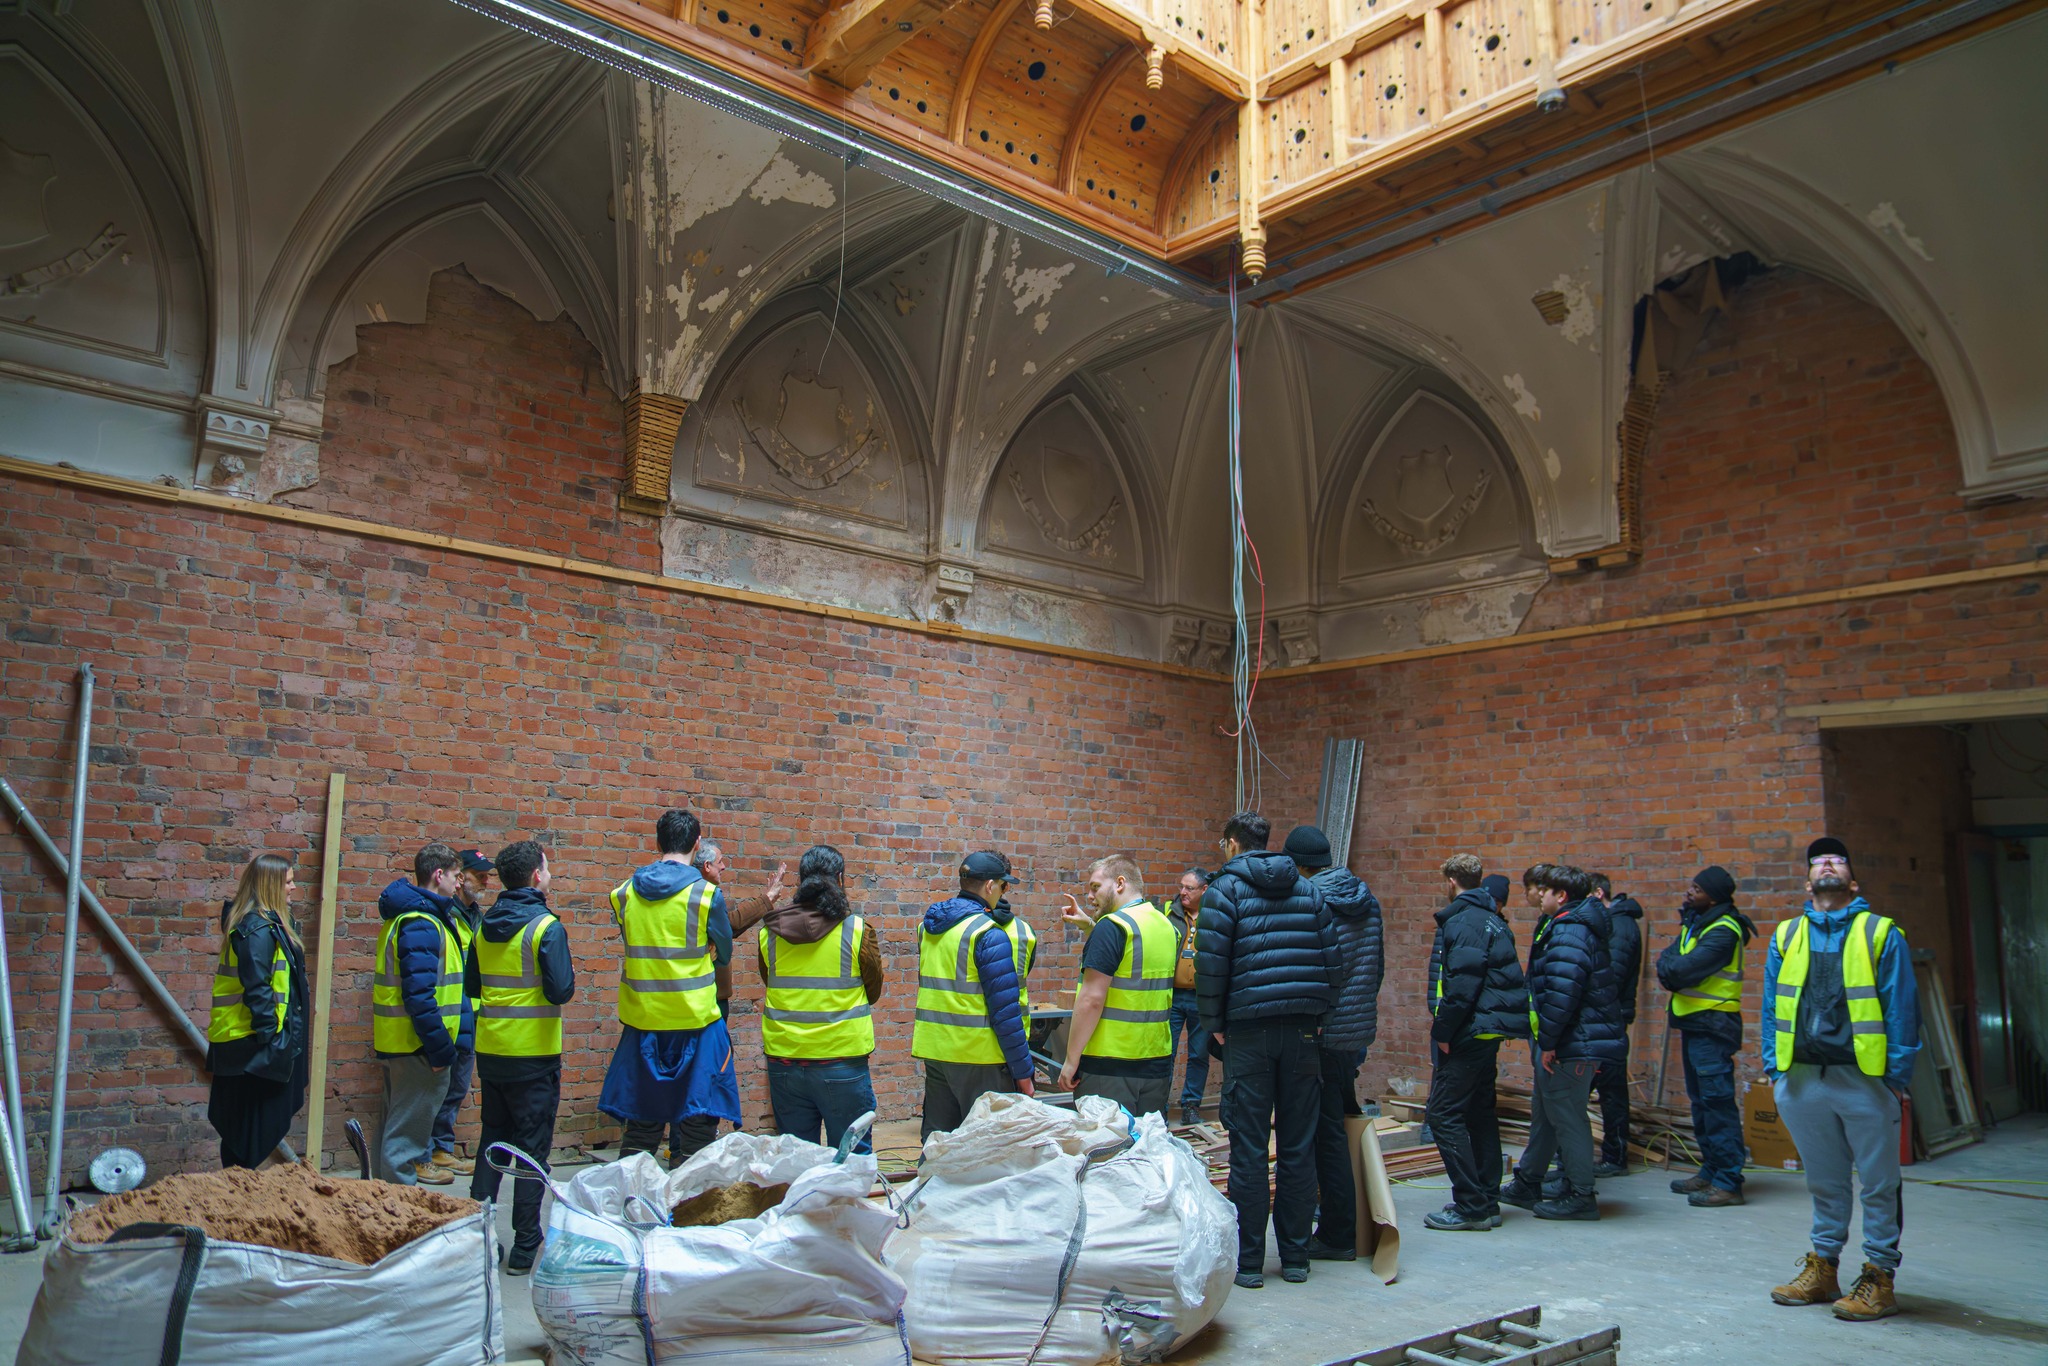 Students at Southport College were given an exclusive tour inside one of Southports most historic buildings as it undergoes a fascinating restoration process